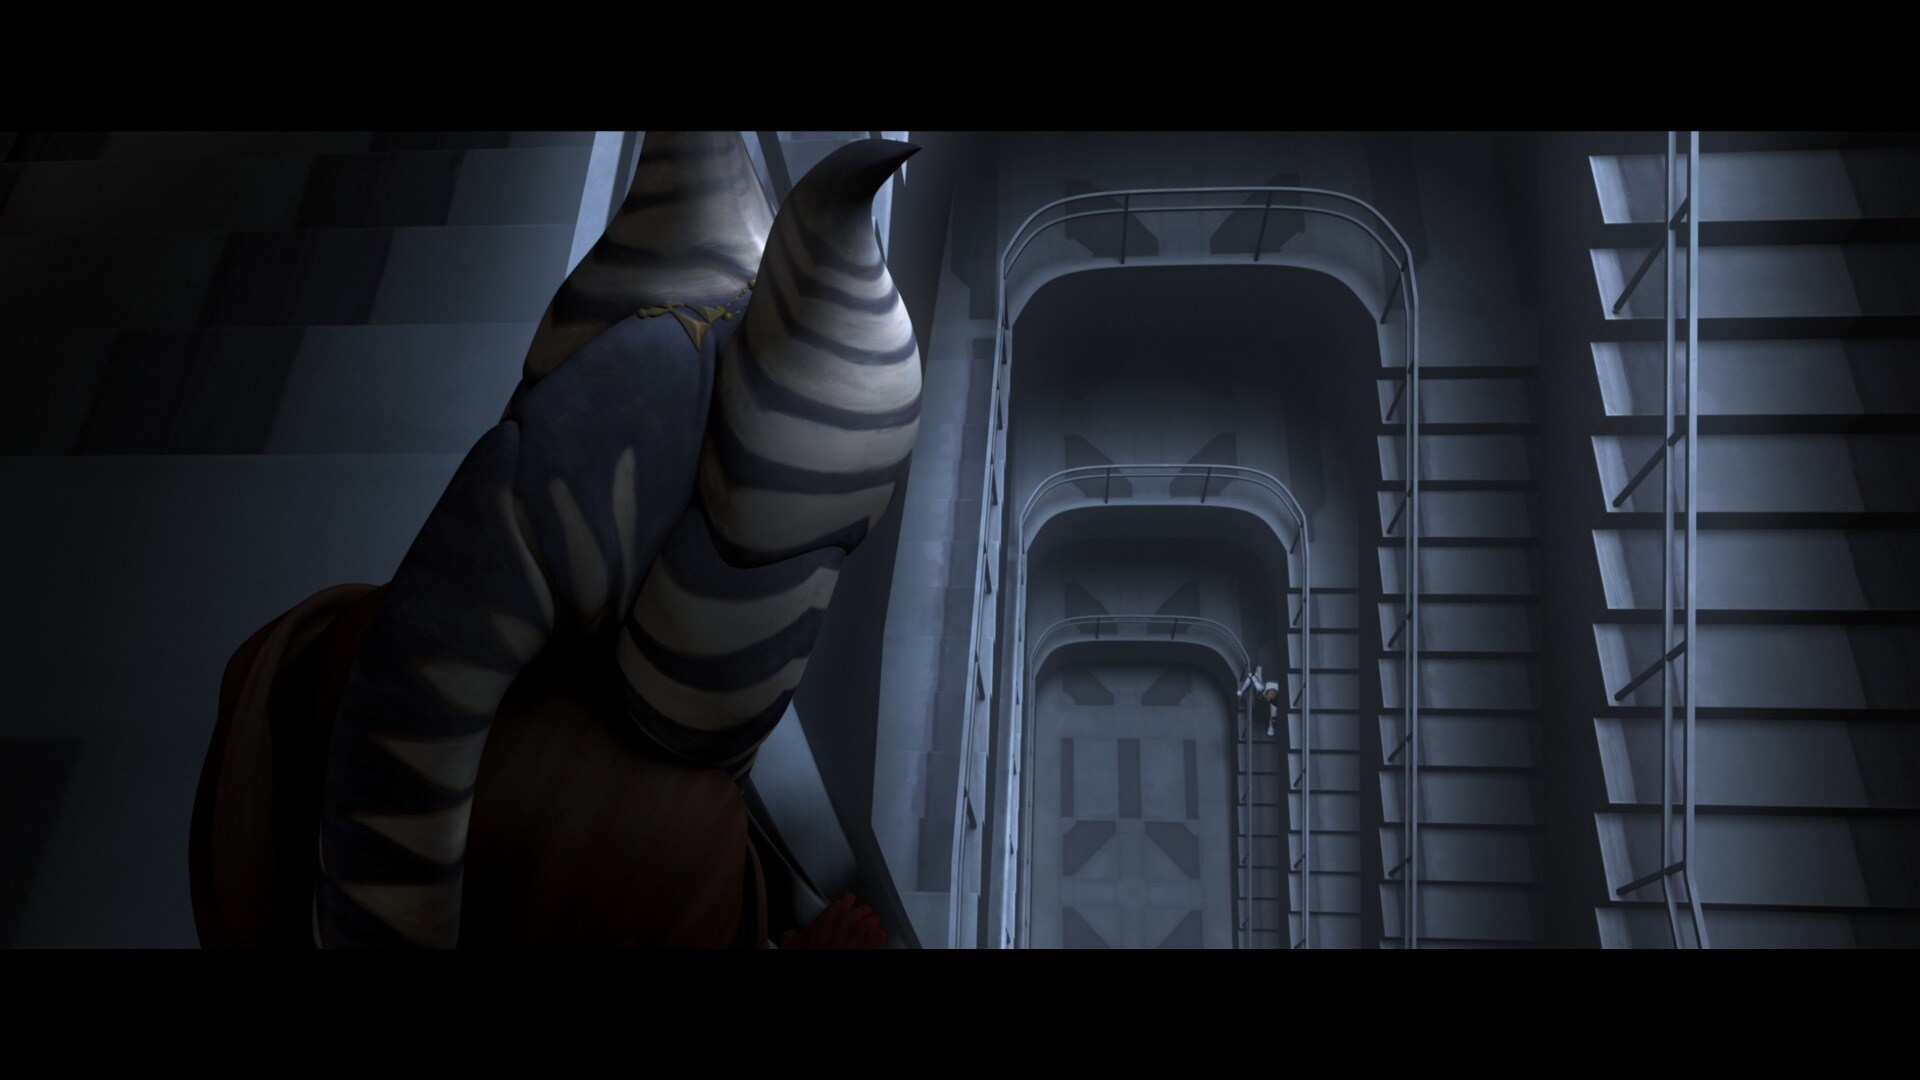 Fives runs out of the chamber into the corridor. Palpatine concludes that Nala Se was correct -- ...